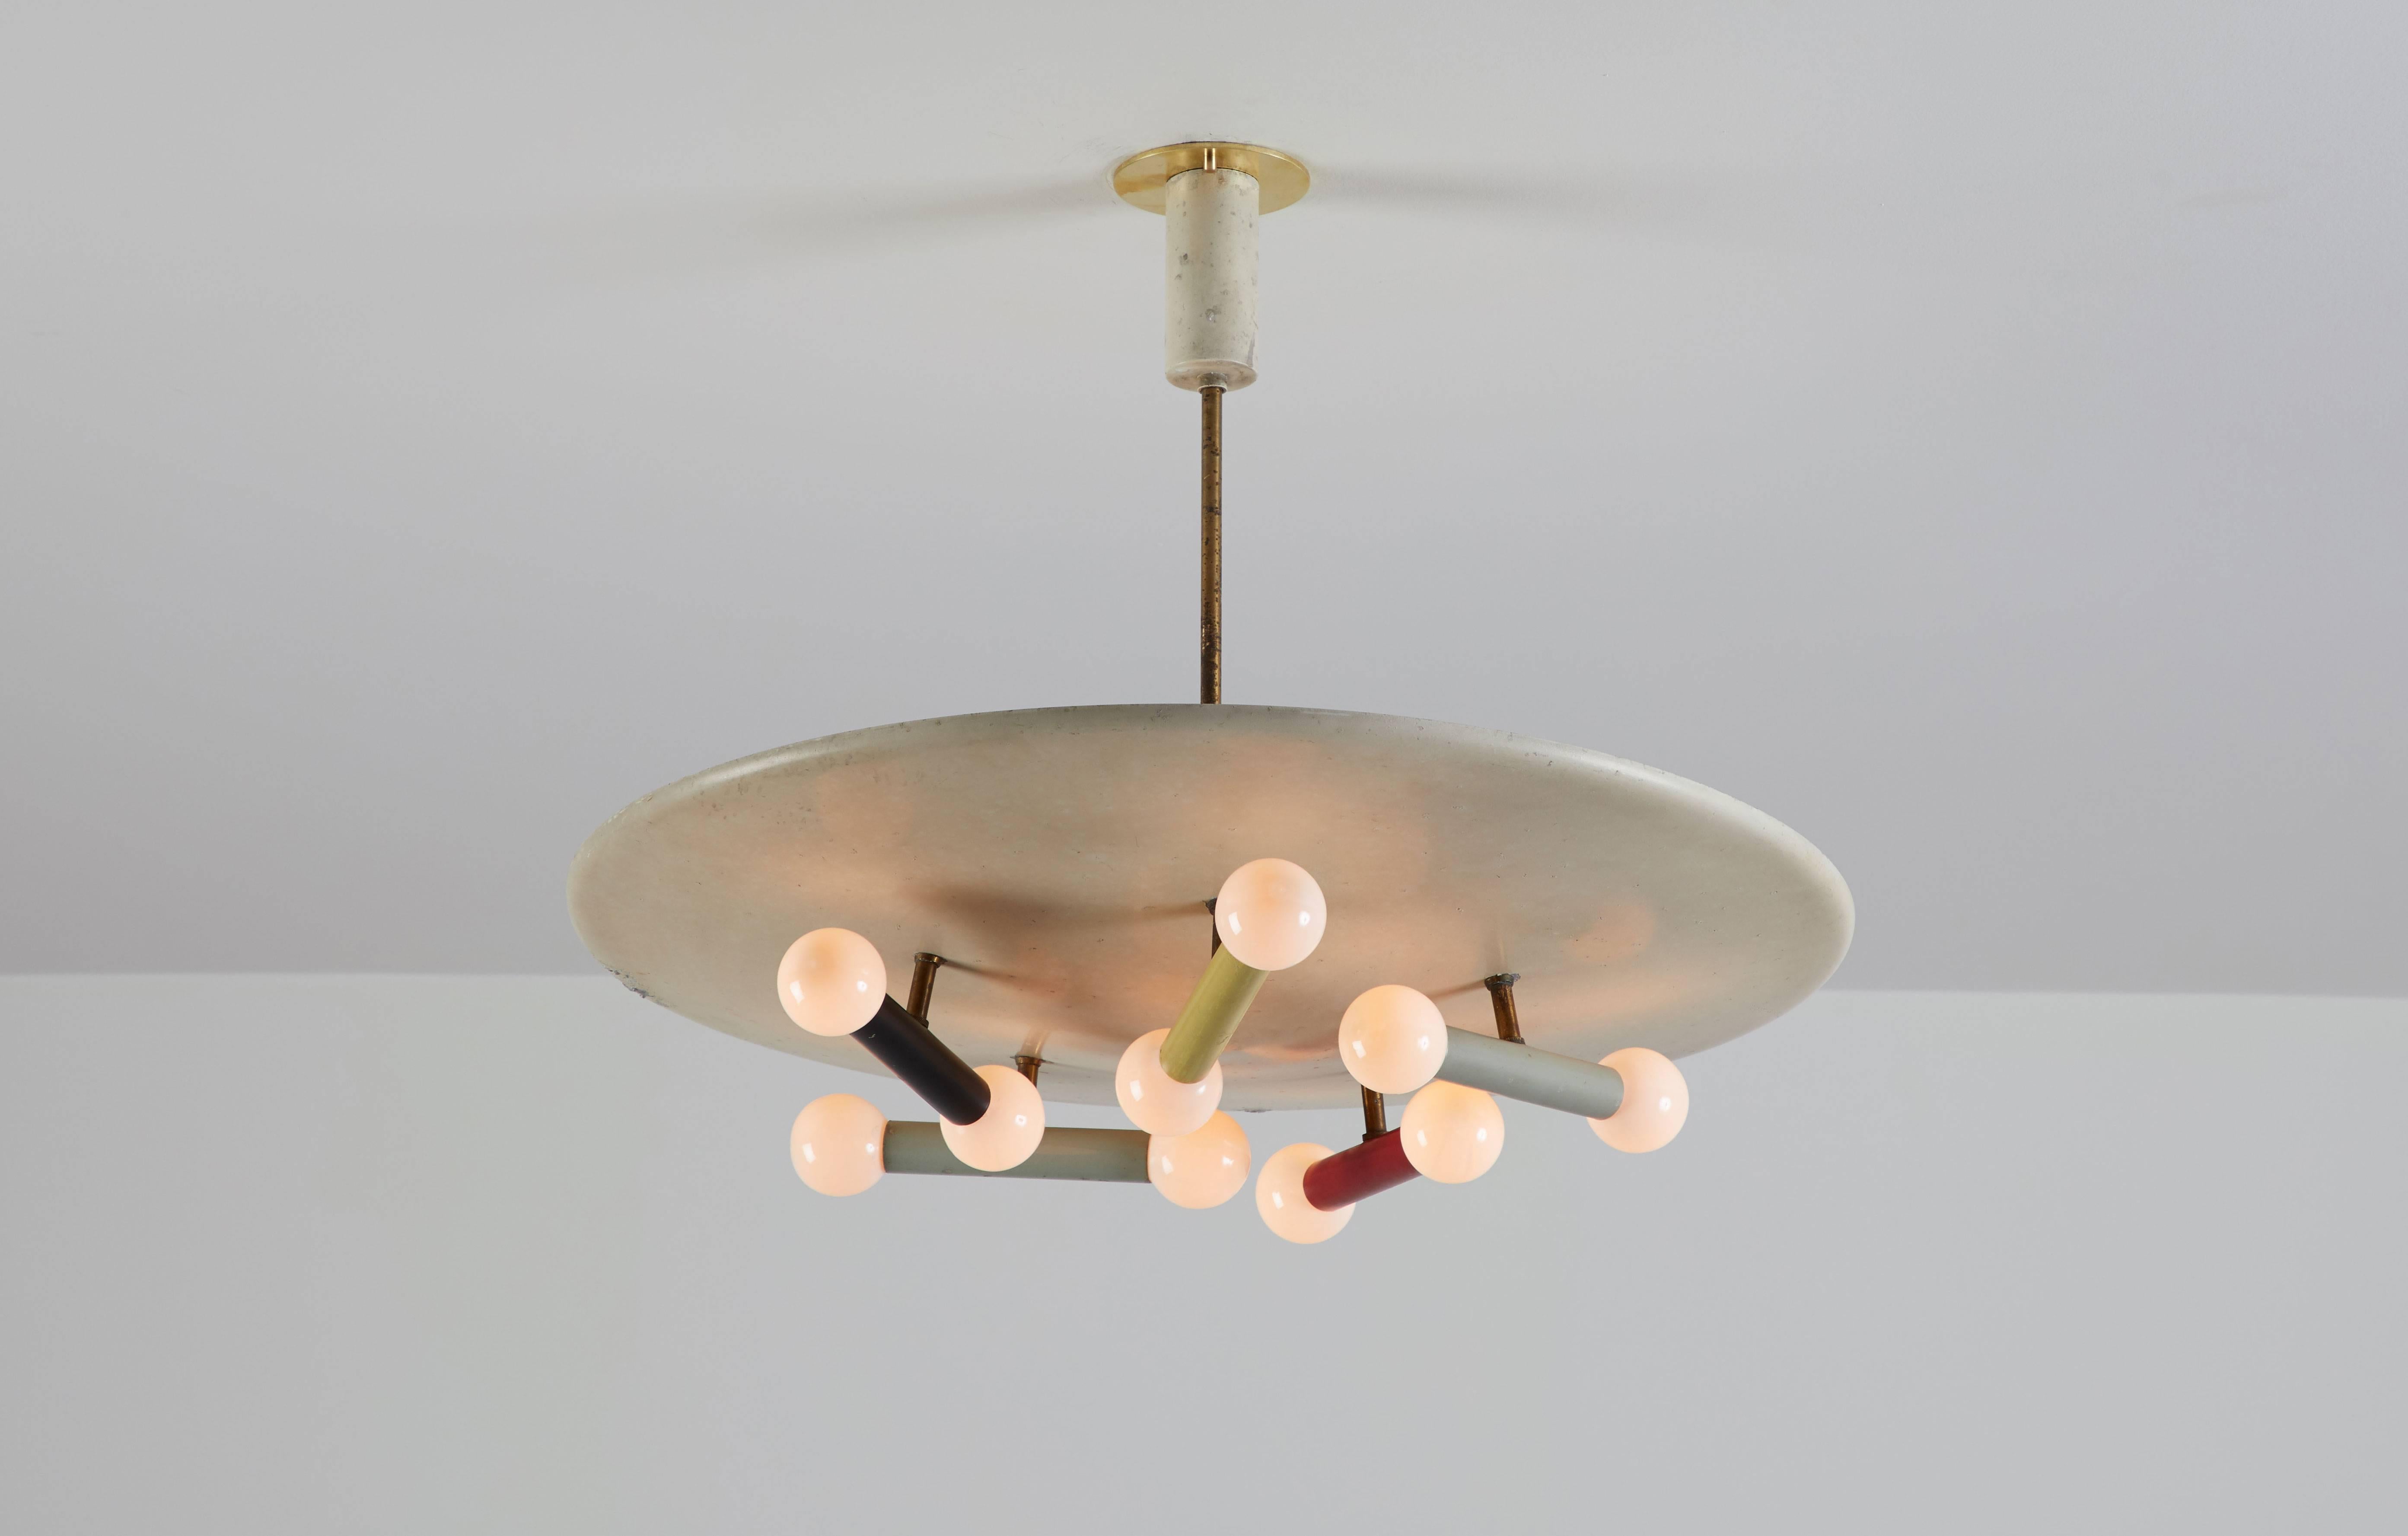 Italian pendant by Oscar Torlasco for Lumi. Manufactured in Italy, circa 1950s. Painted aluminum, brass hardware. Wired for US junction boxes. Custom brass canopy. Takes ten E14 25w maximum bulbs, three e27 60w maximum bulbs.
    